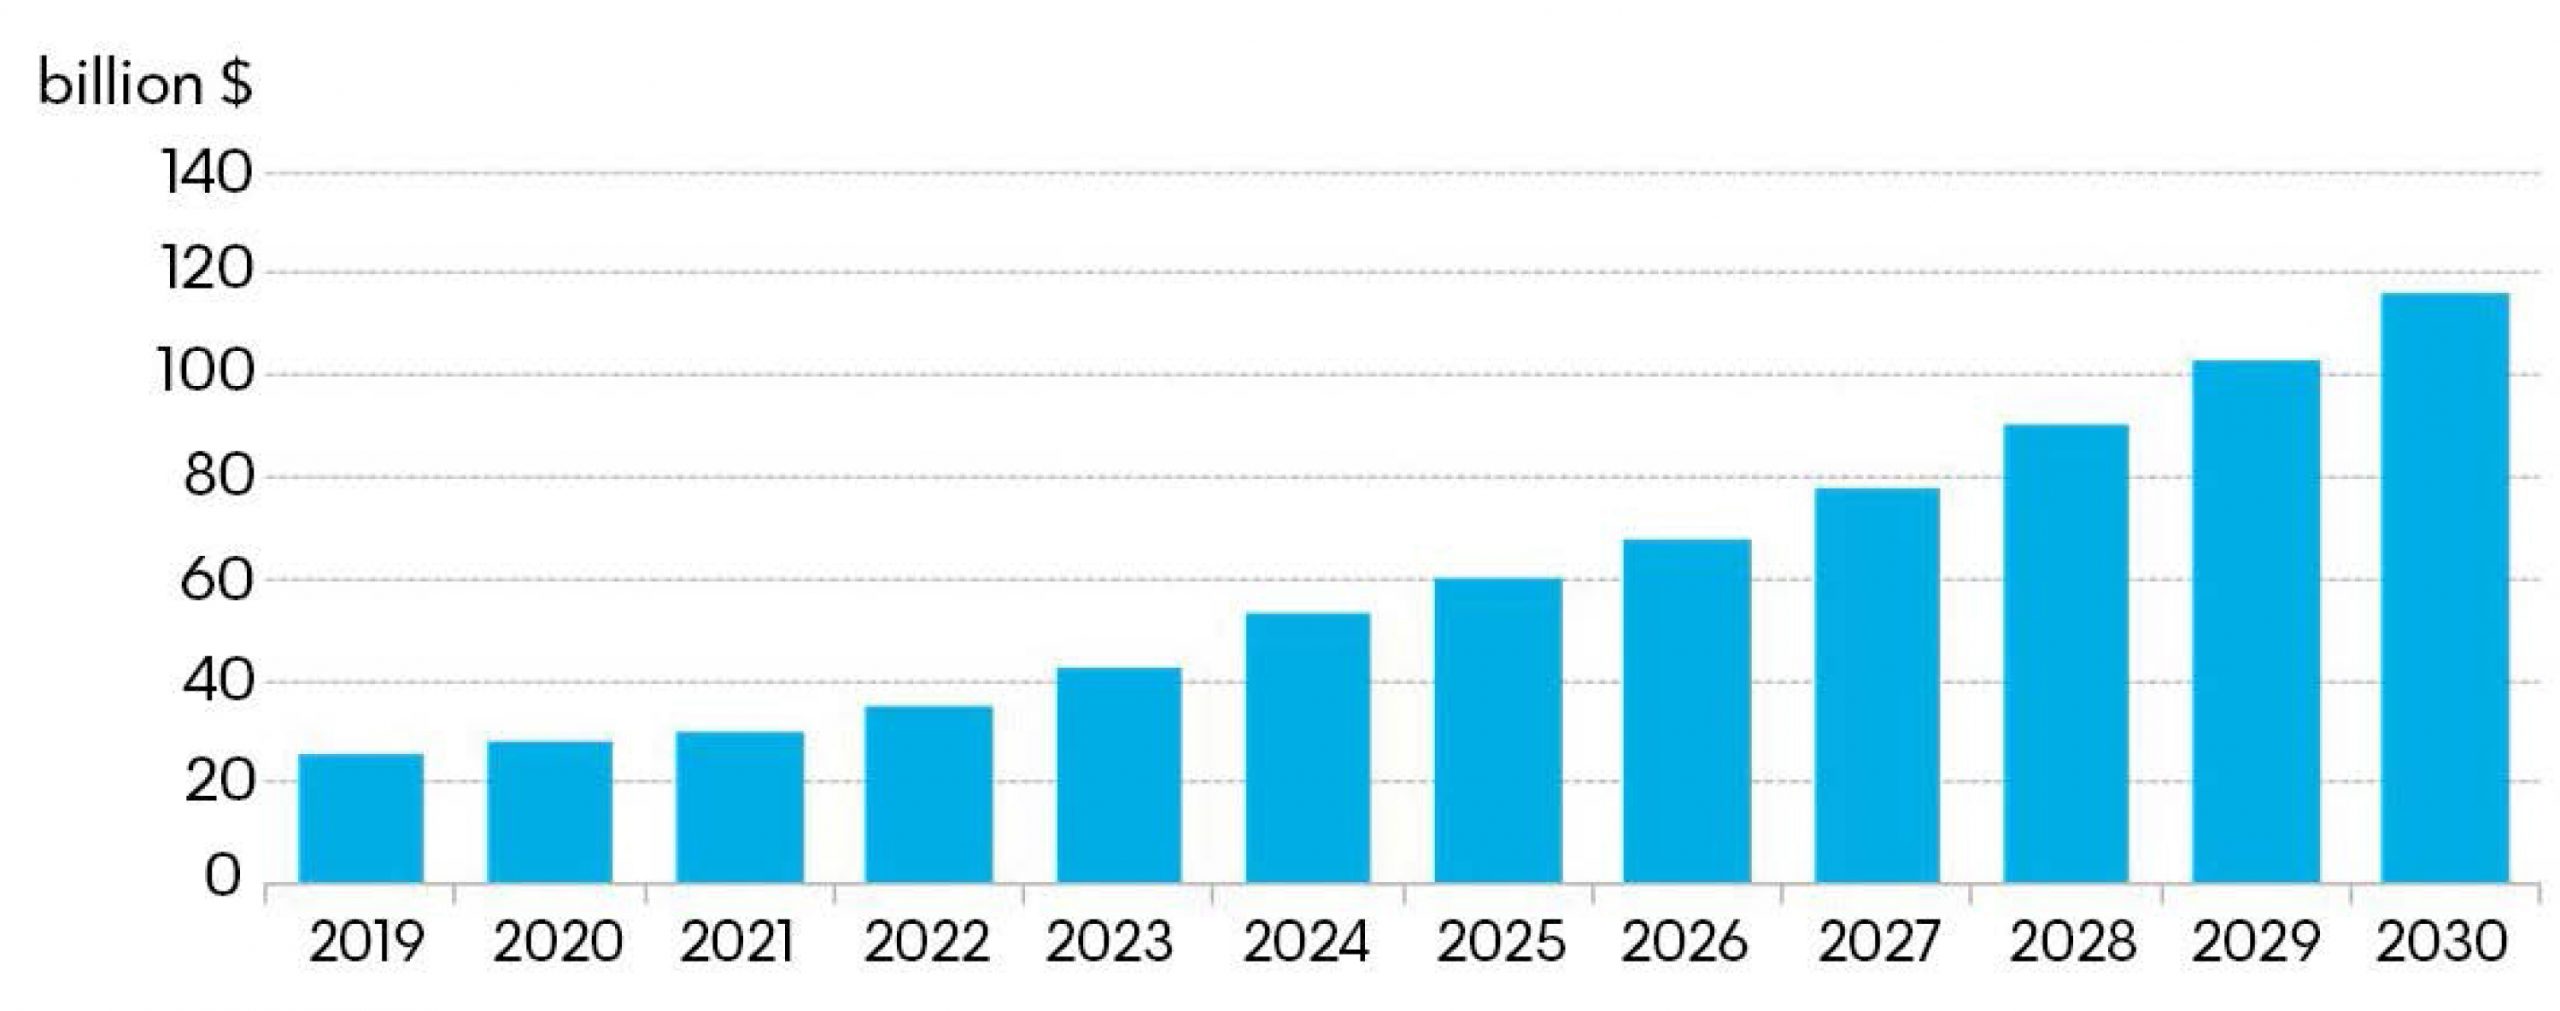 Fig. 4. Sizes of the 2019-2030 Annual Worldwide Market for Lithium Ion Energy Storage (EES), billion USD. Source: BNEF’s 2019 Battery Price Survey market size.